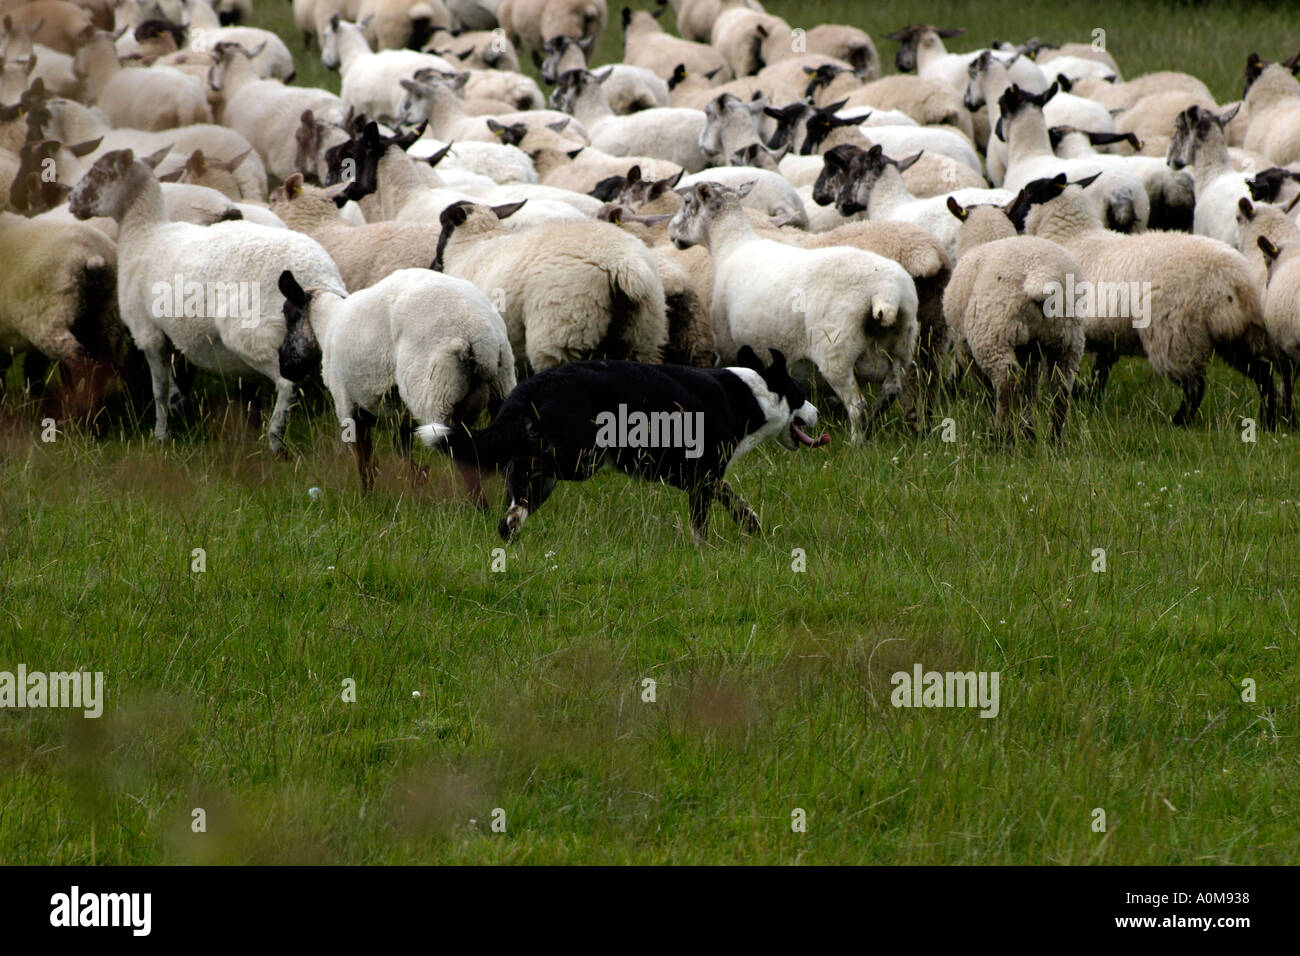 why do sheep follow dogs